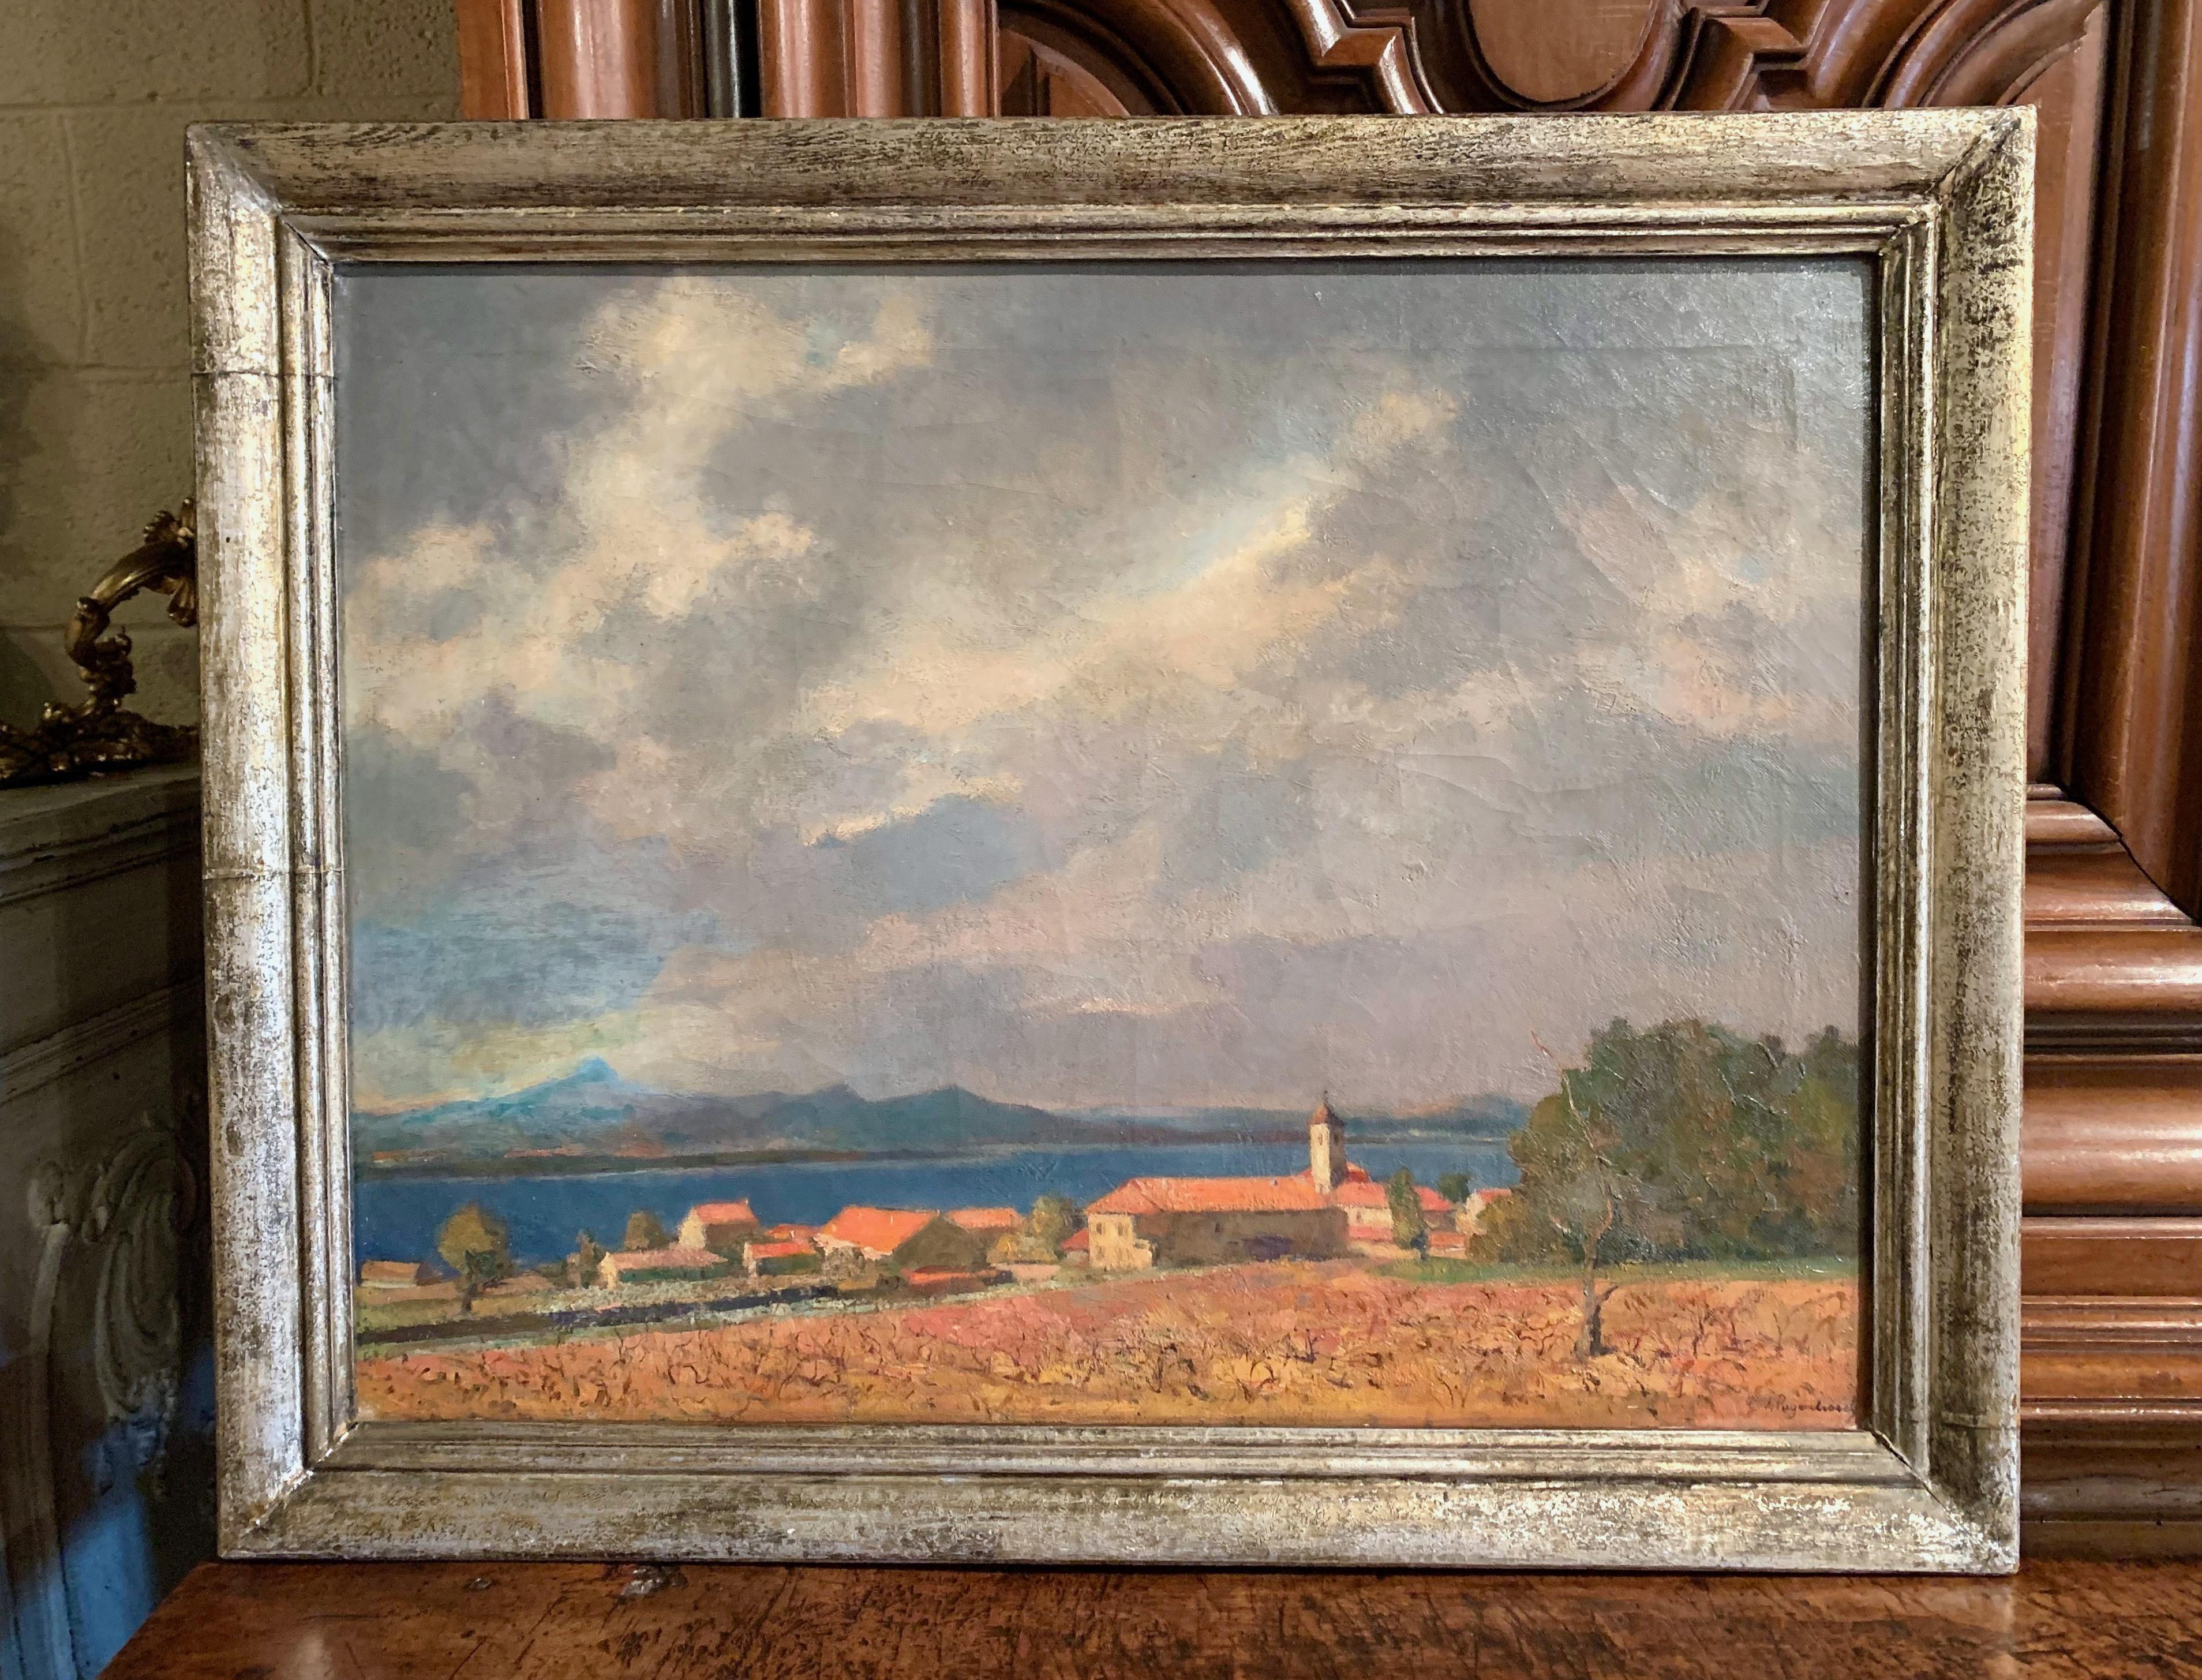 French Riviera Oil on Canvas Painting Signed G. Van Puyenbroeck, Dated 1932 In Good Condition For Sale In Dallas, TX